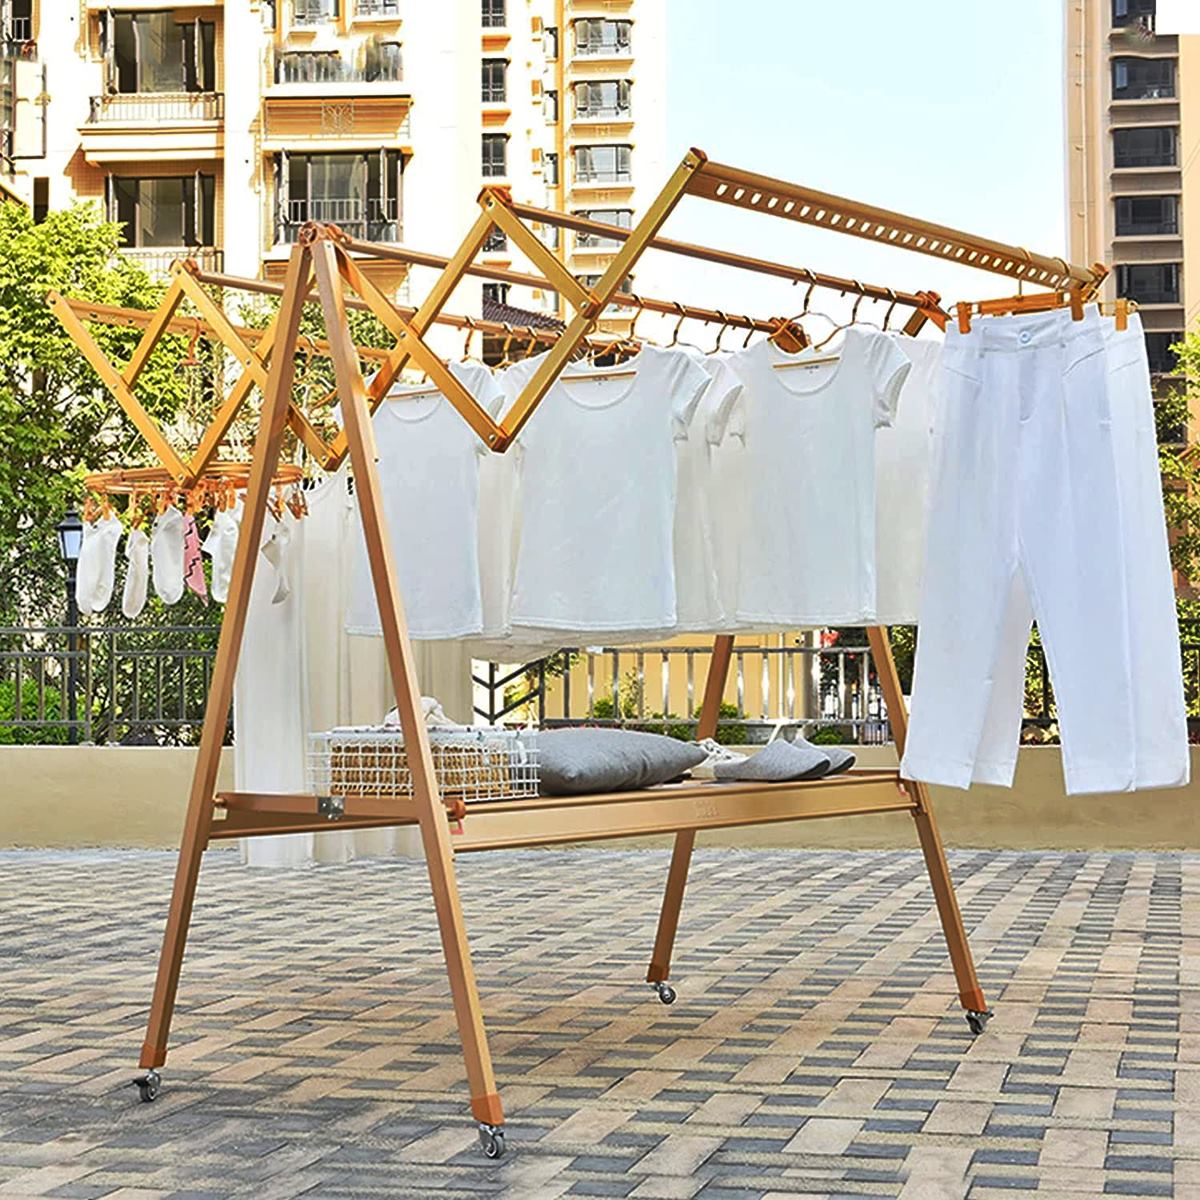 https://citizenside.com/wp-content/uploads/2023/10/13-unbelievable-clothes-drying-rack-outdoor-for-2023-1696695987.jpg